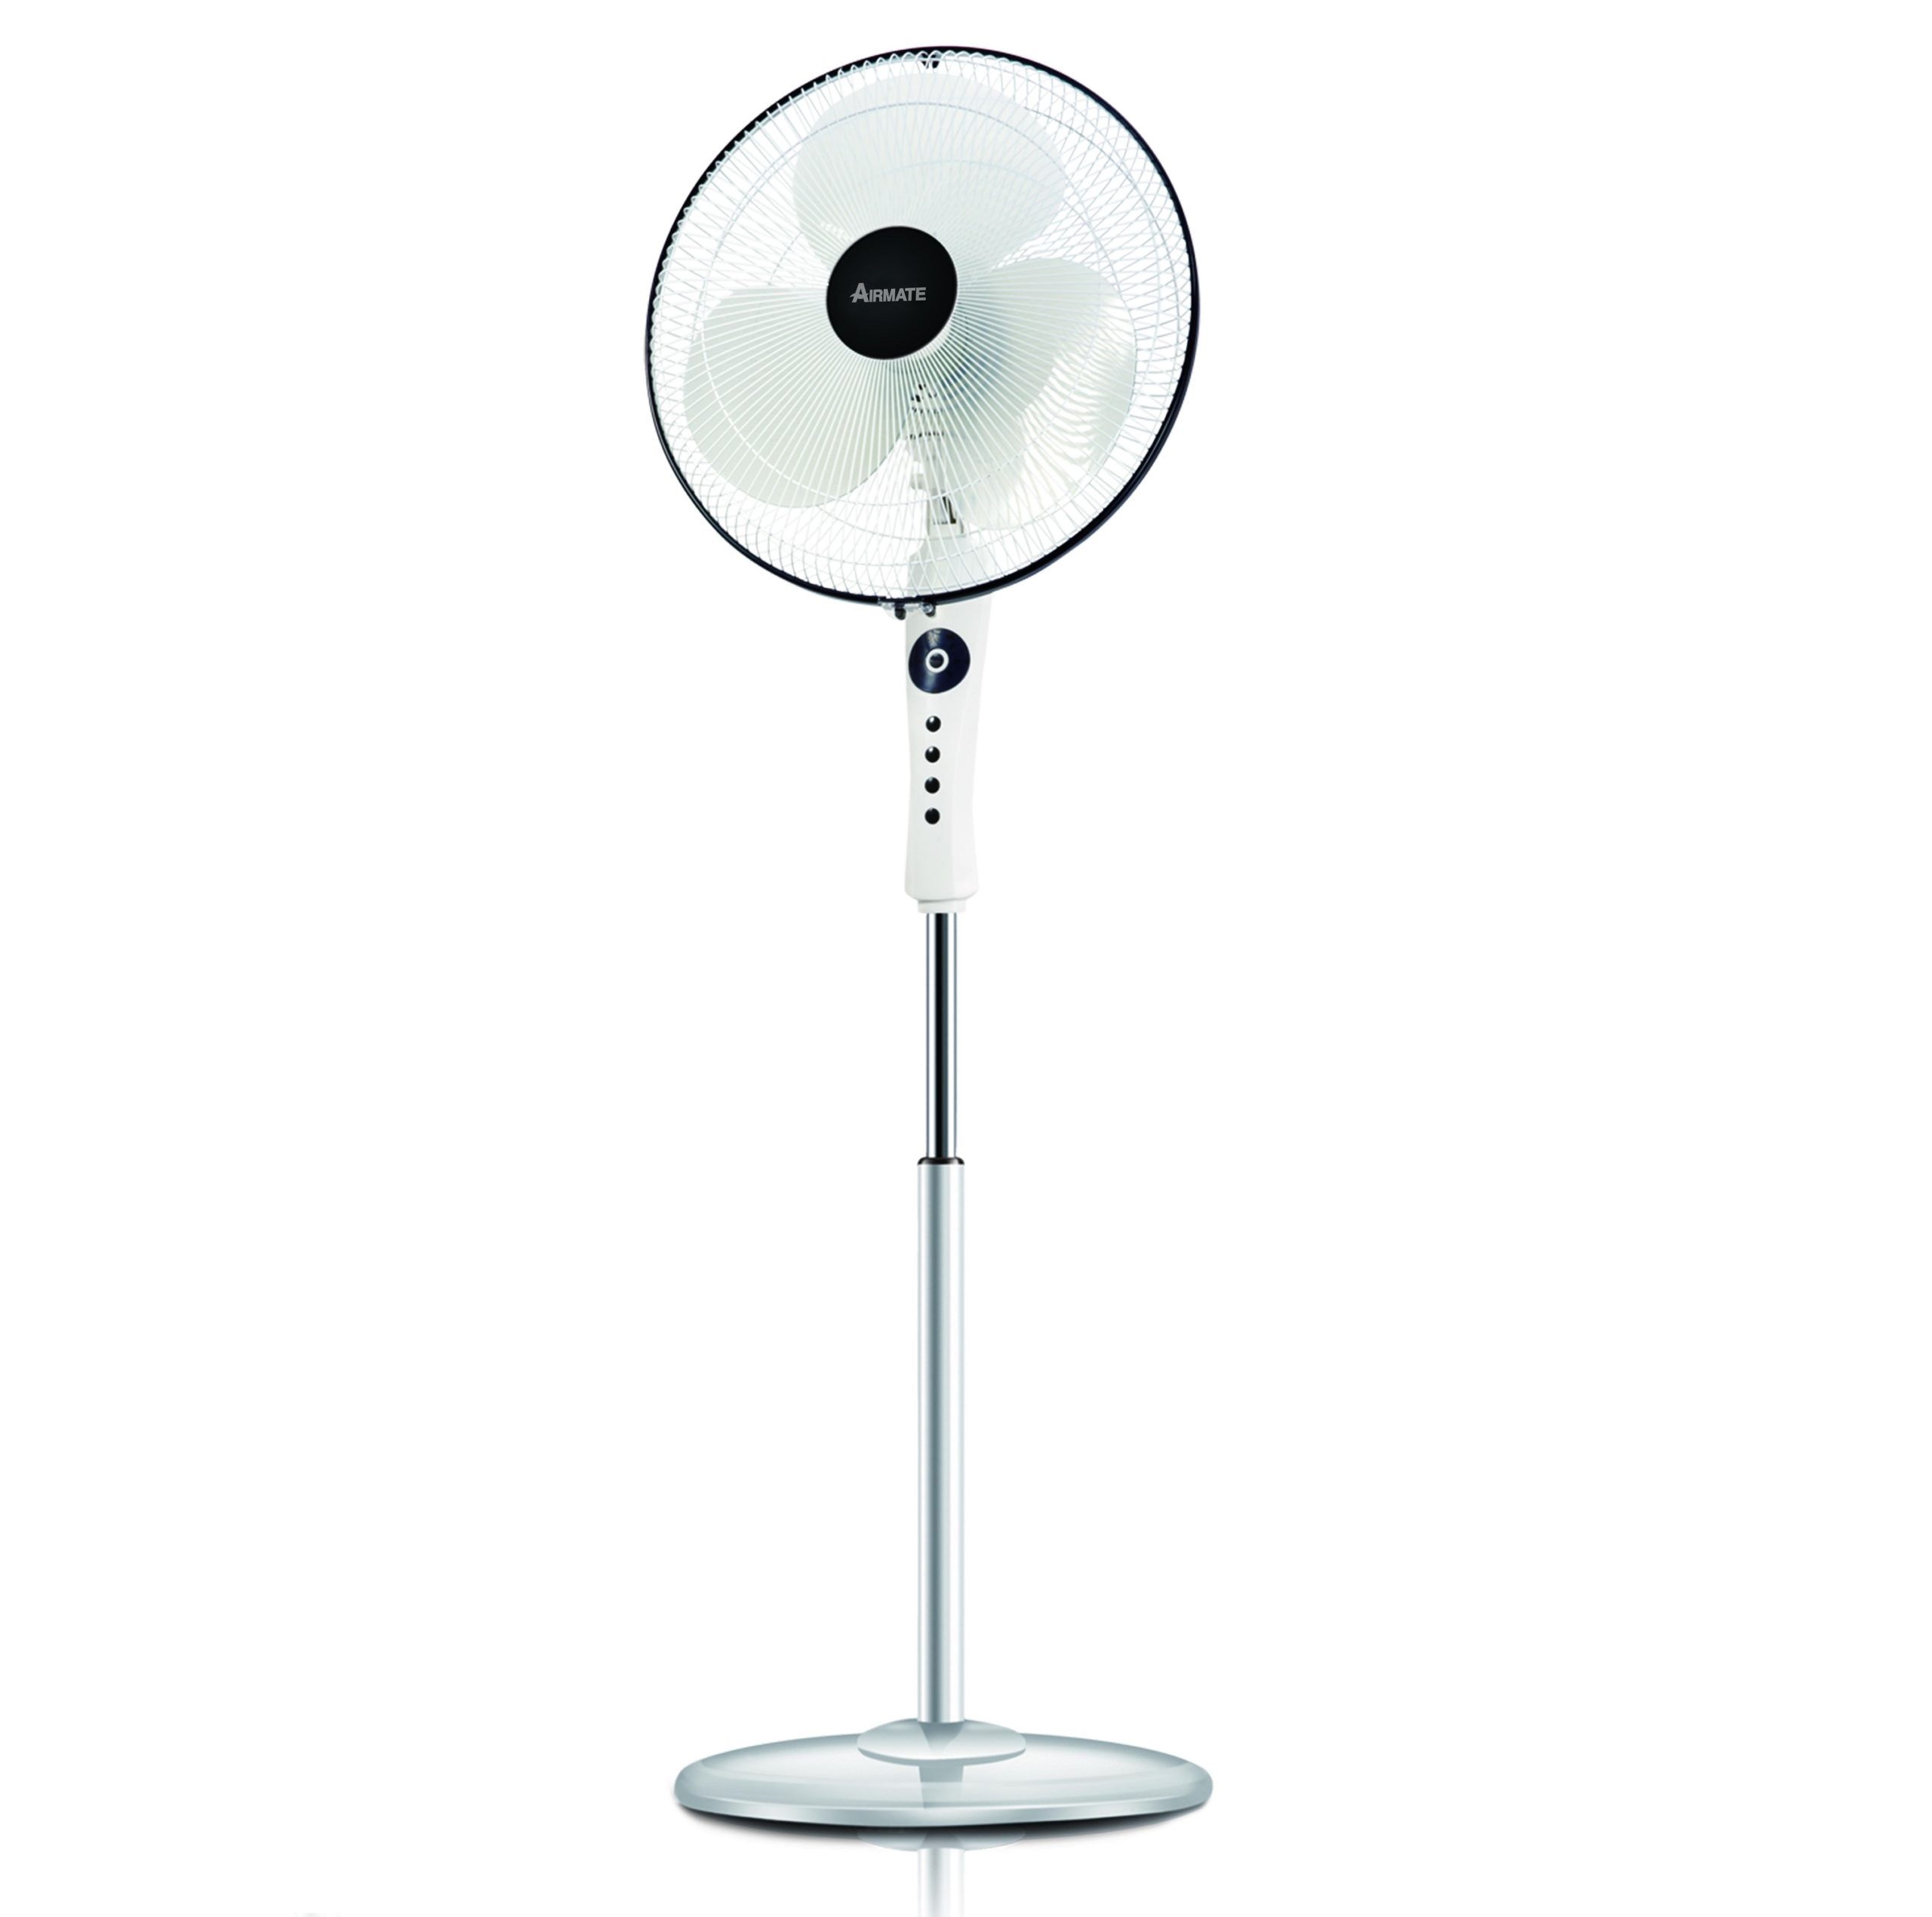 Airmate Stand Fan with remote